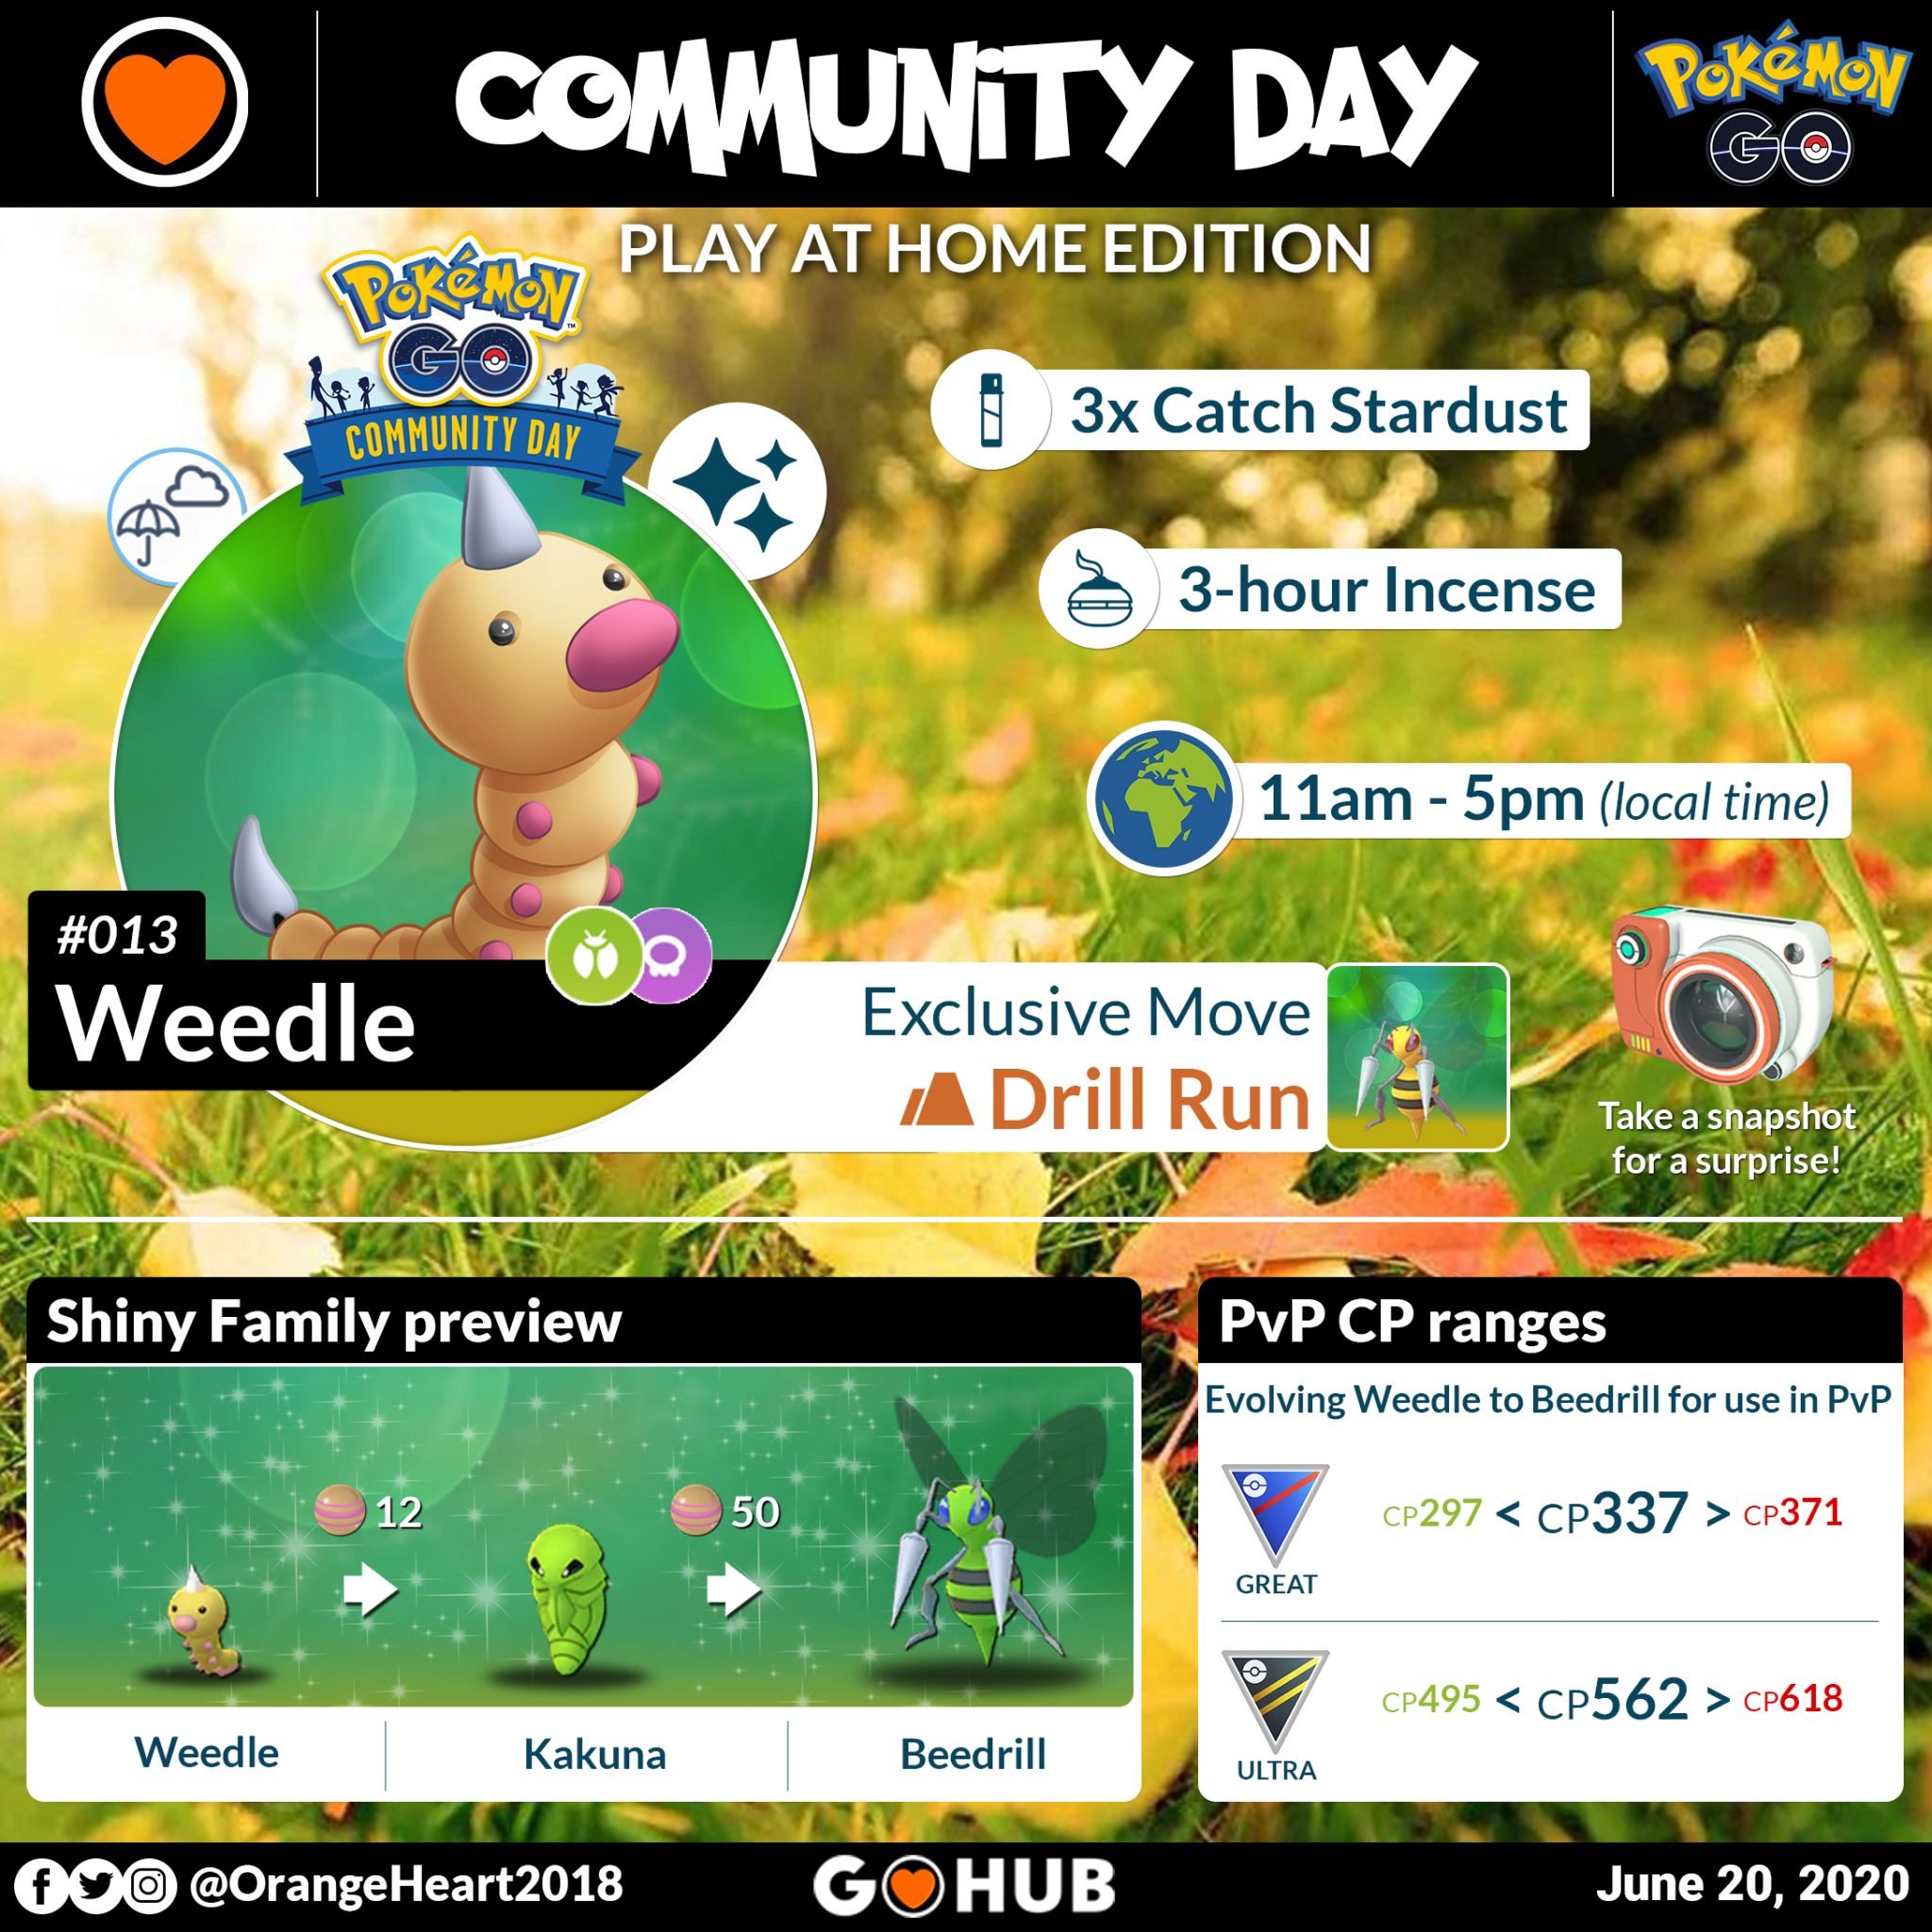 June Community Day brings Shiny Weedle and Beedrill with Drill Run